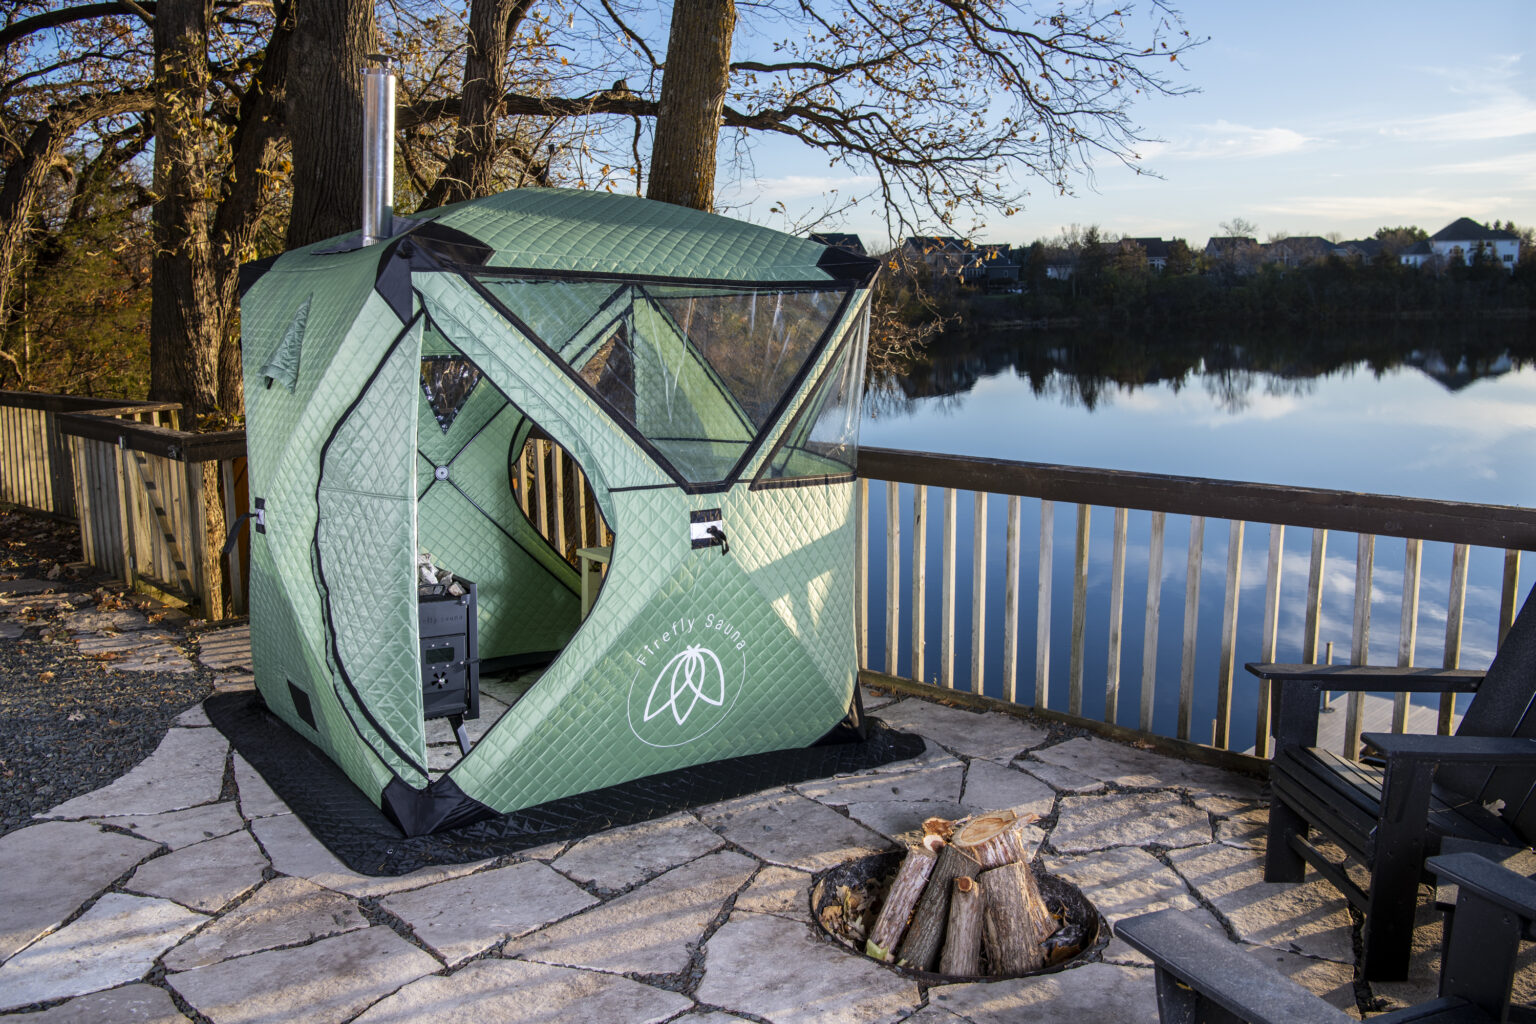 Sauna Tents - Are They A Worthy Affordable Alternative?